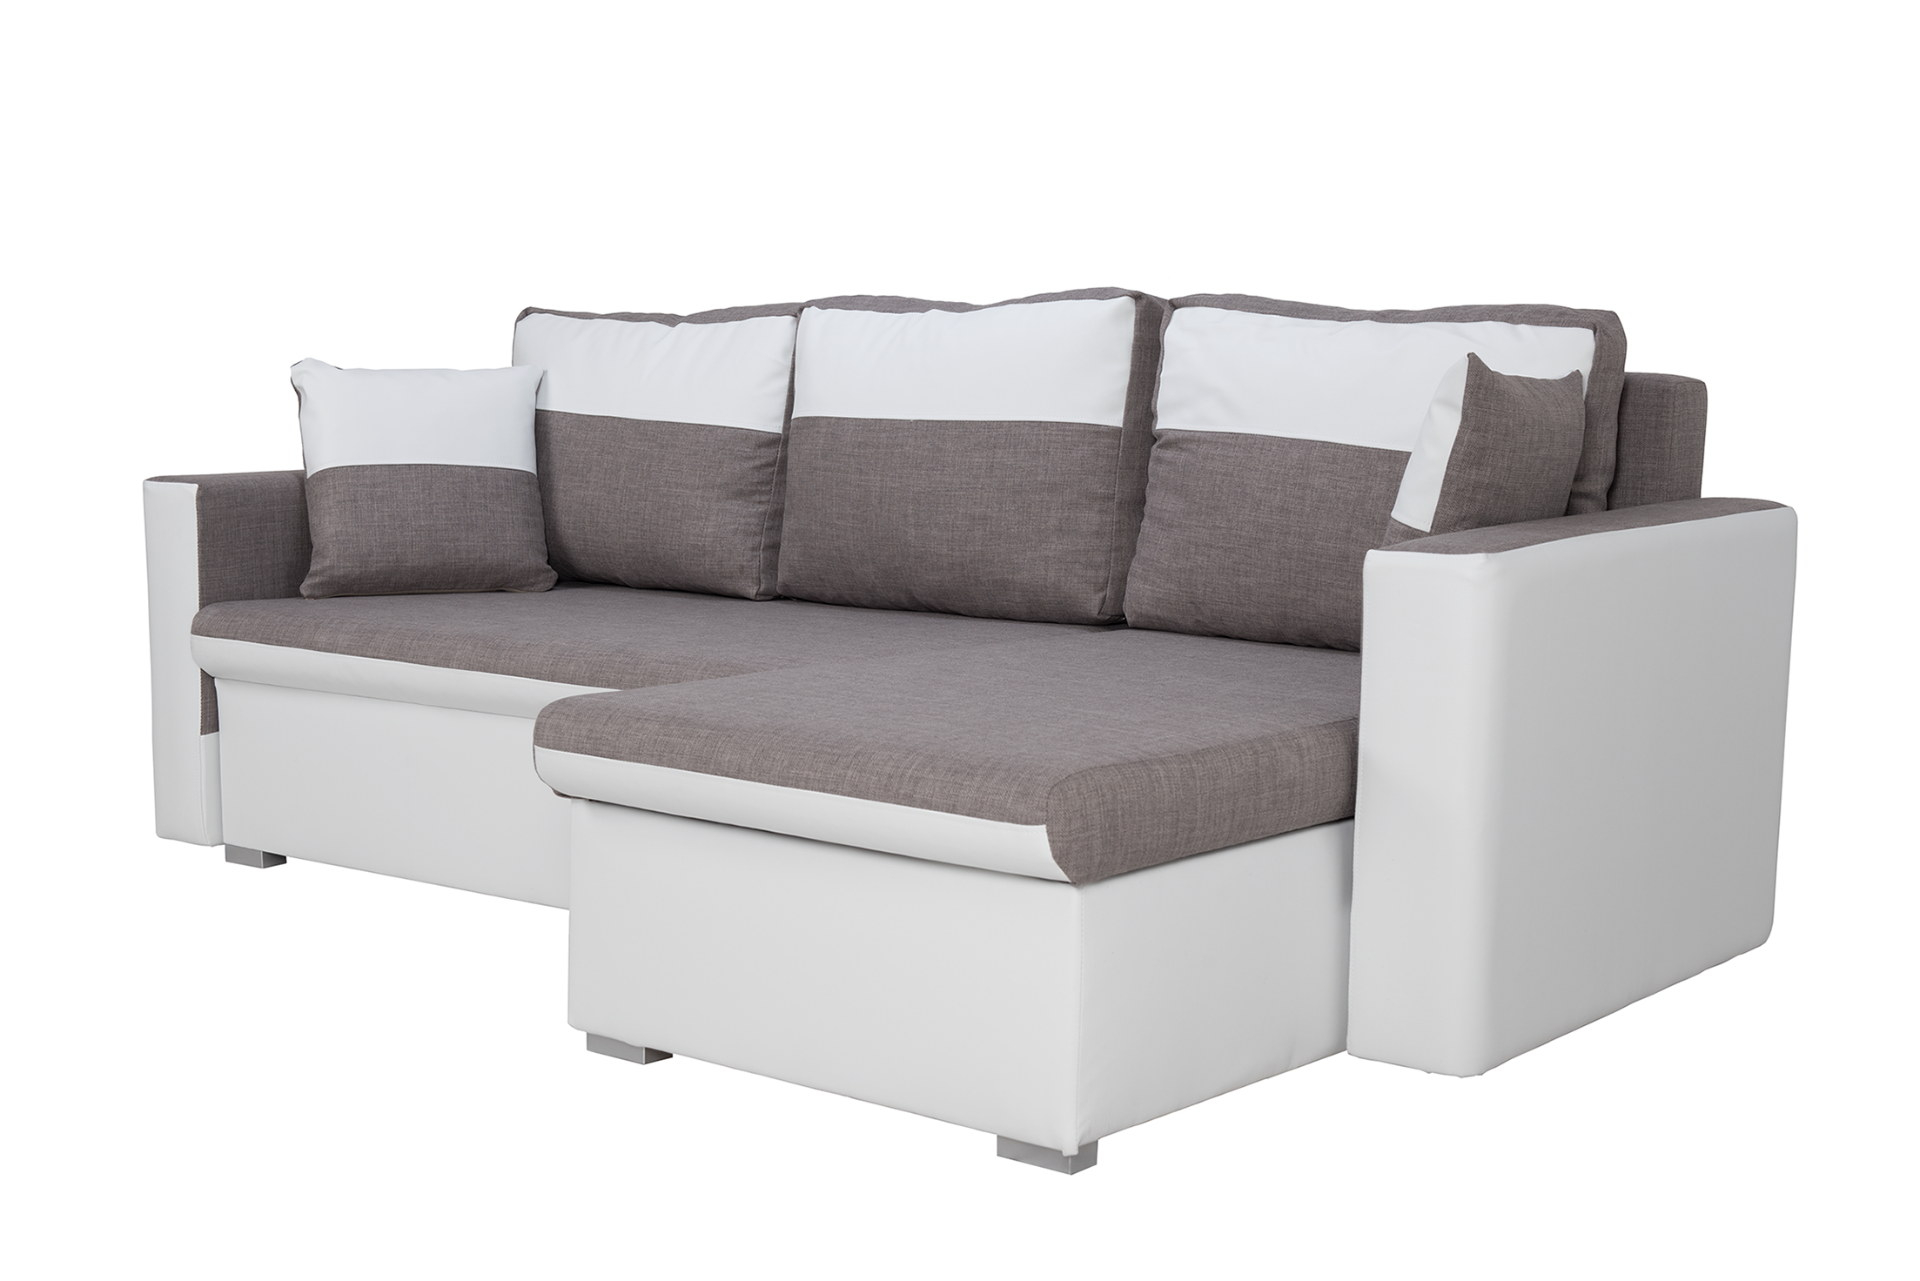 Flàvio corner sofa bed right hand facing in white and grey faux leather - Image 3 of 3